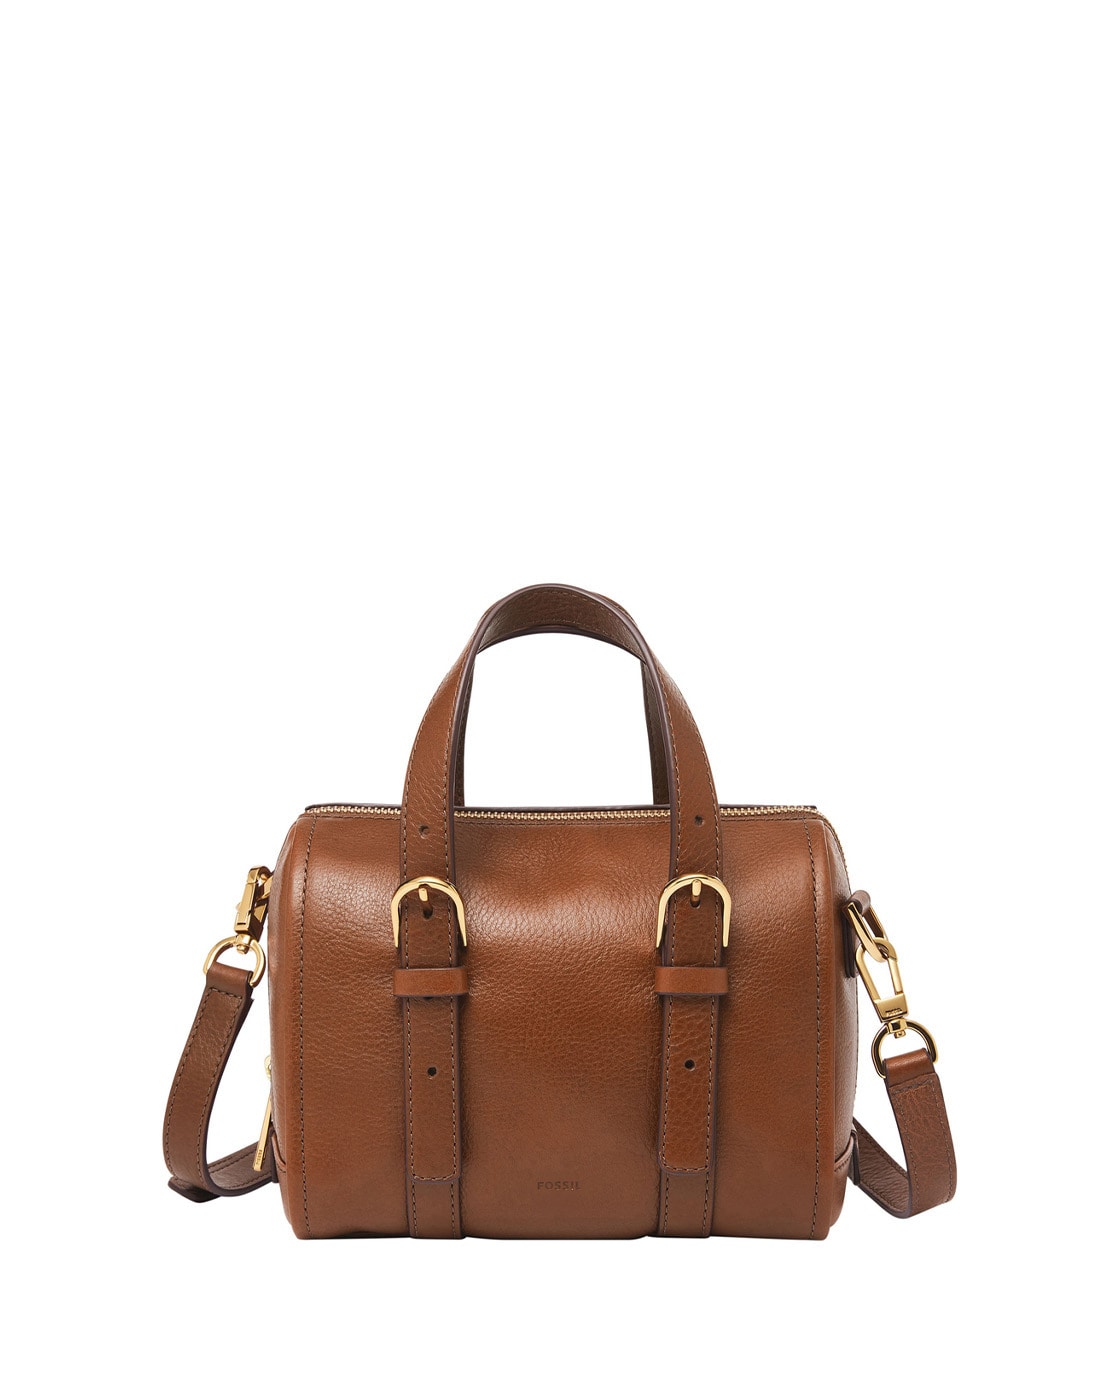 Fossil Brand 1954 Authentic Style Crossbody | Fashion trends, Style, Purses  crossbody